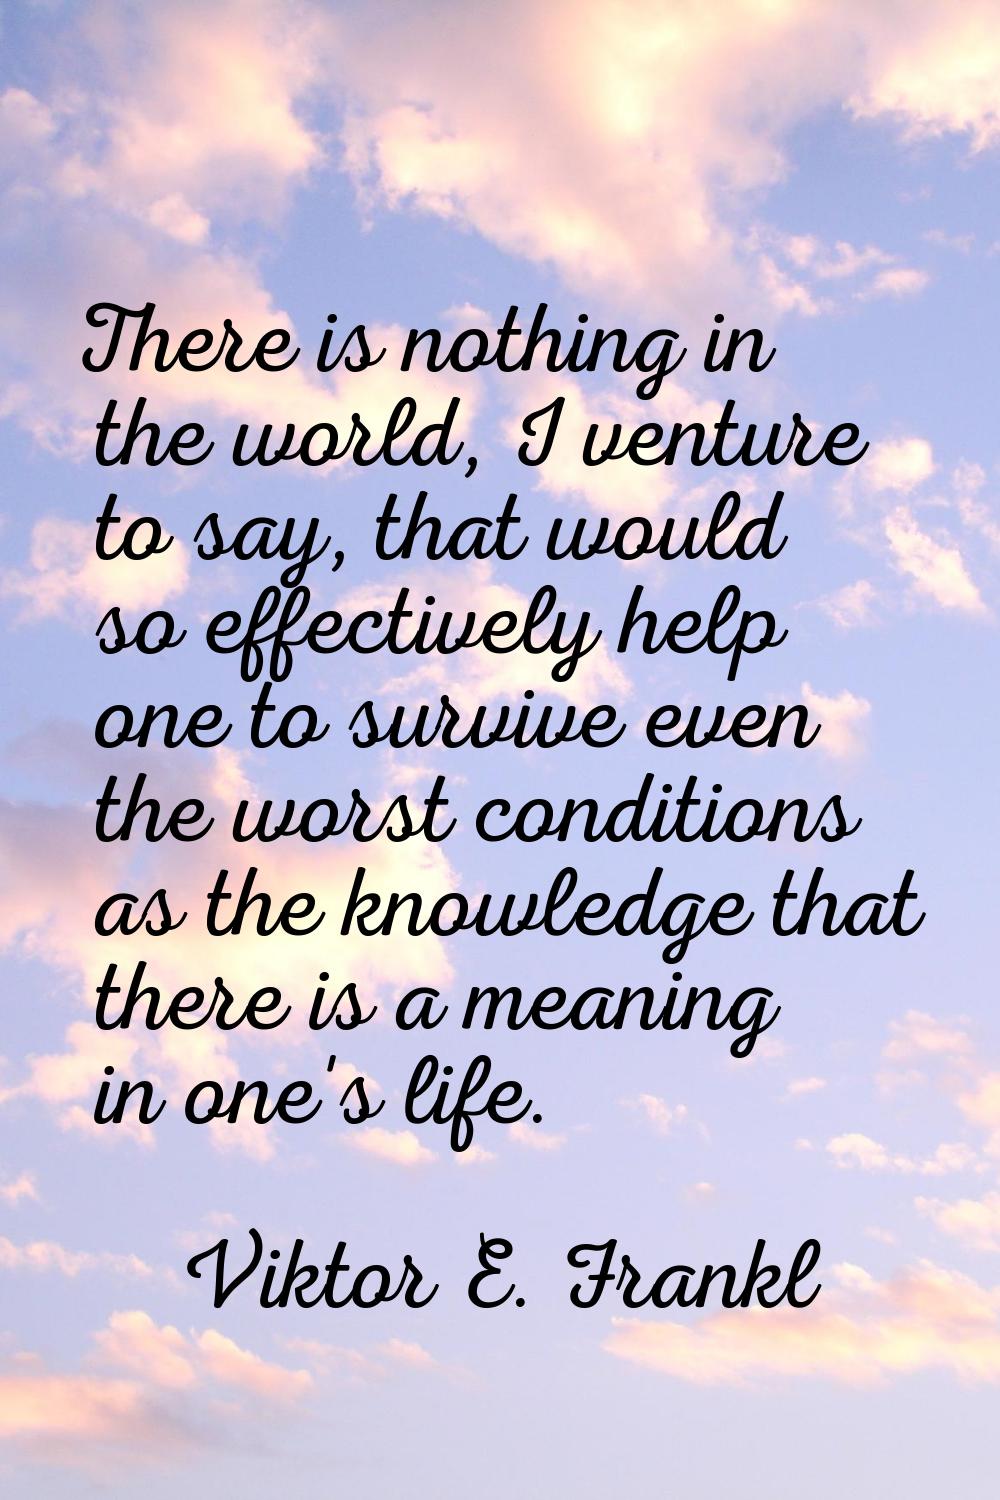 There is nothing in the world, I venture to say, that would so effectively help one to survive even